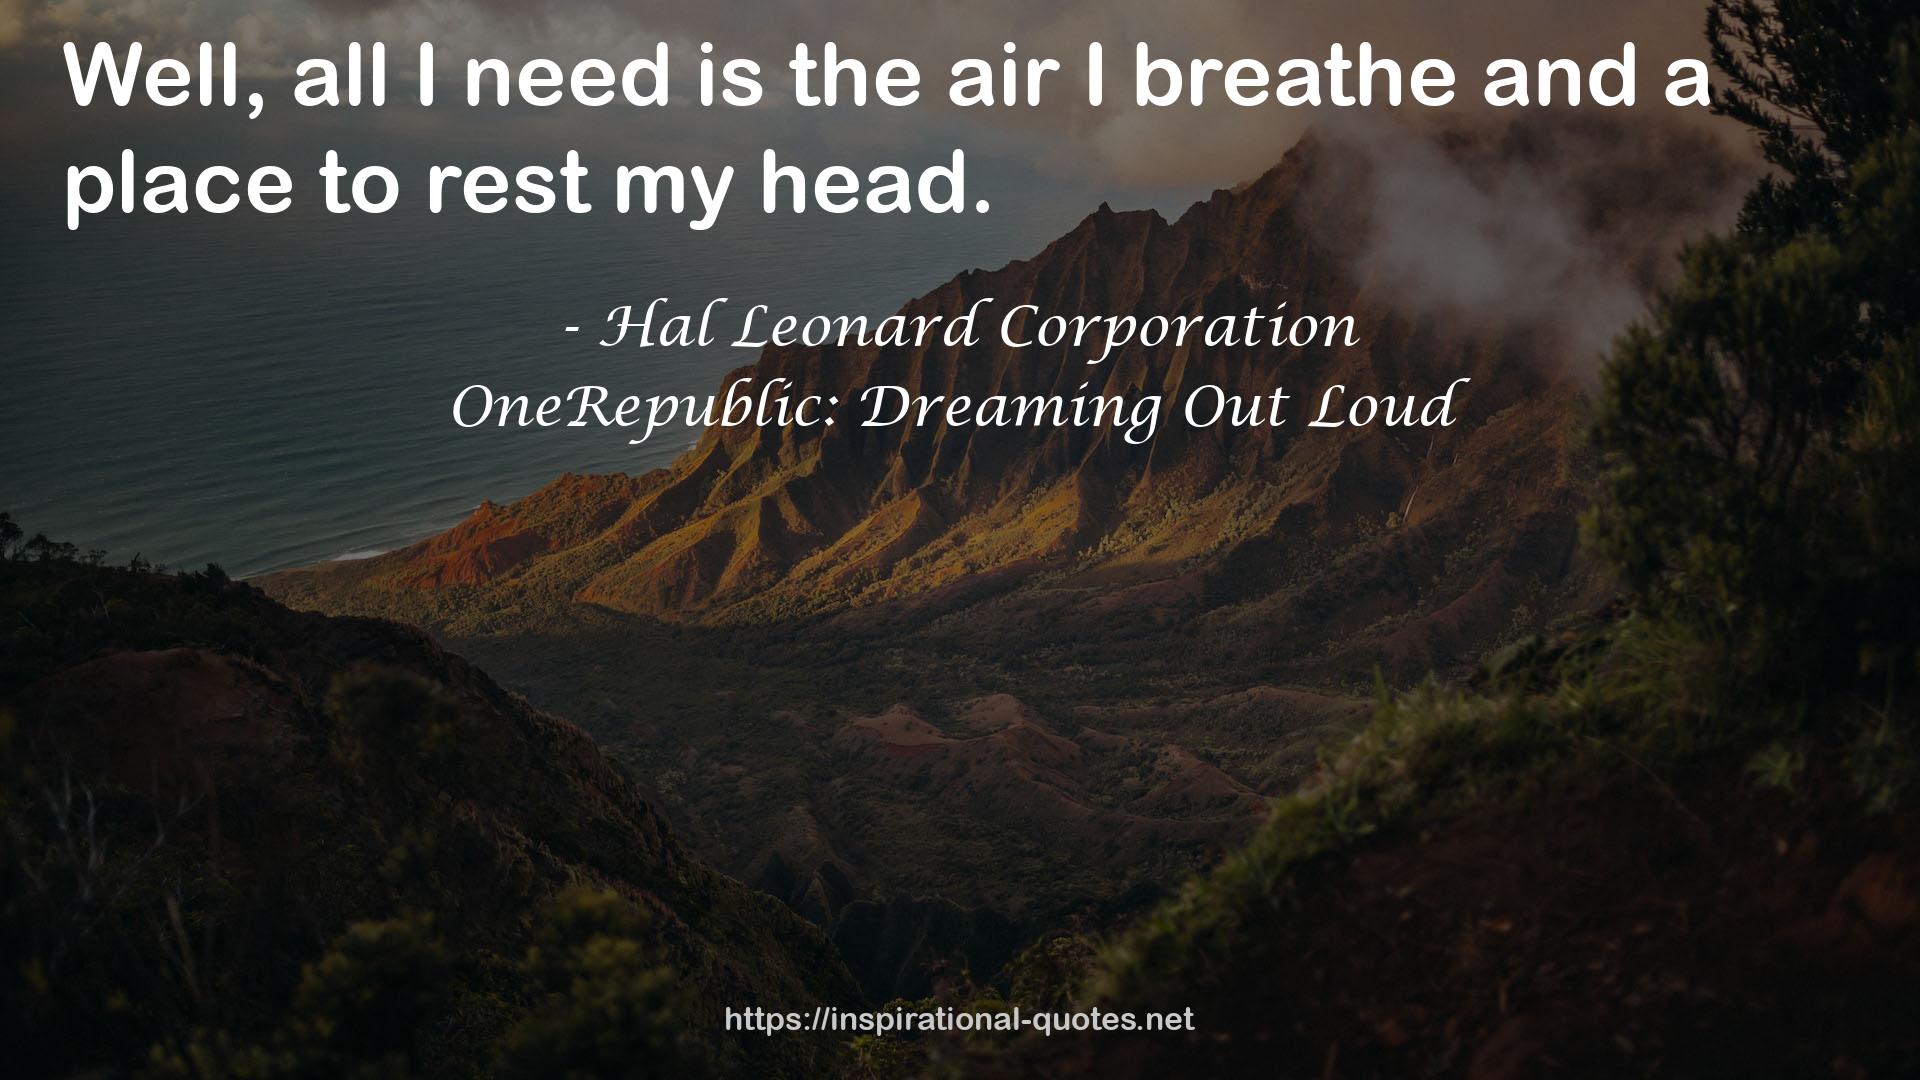 OneRepublic: Dreaming Out Loud QUOTES